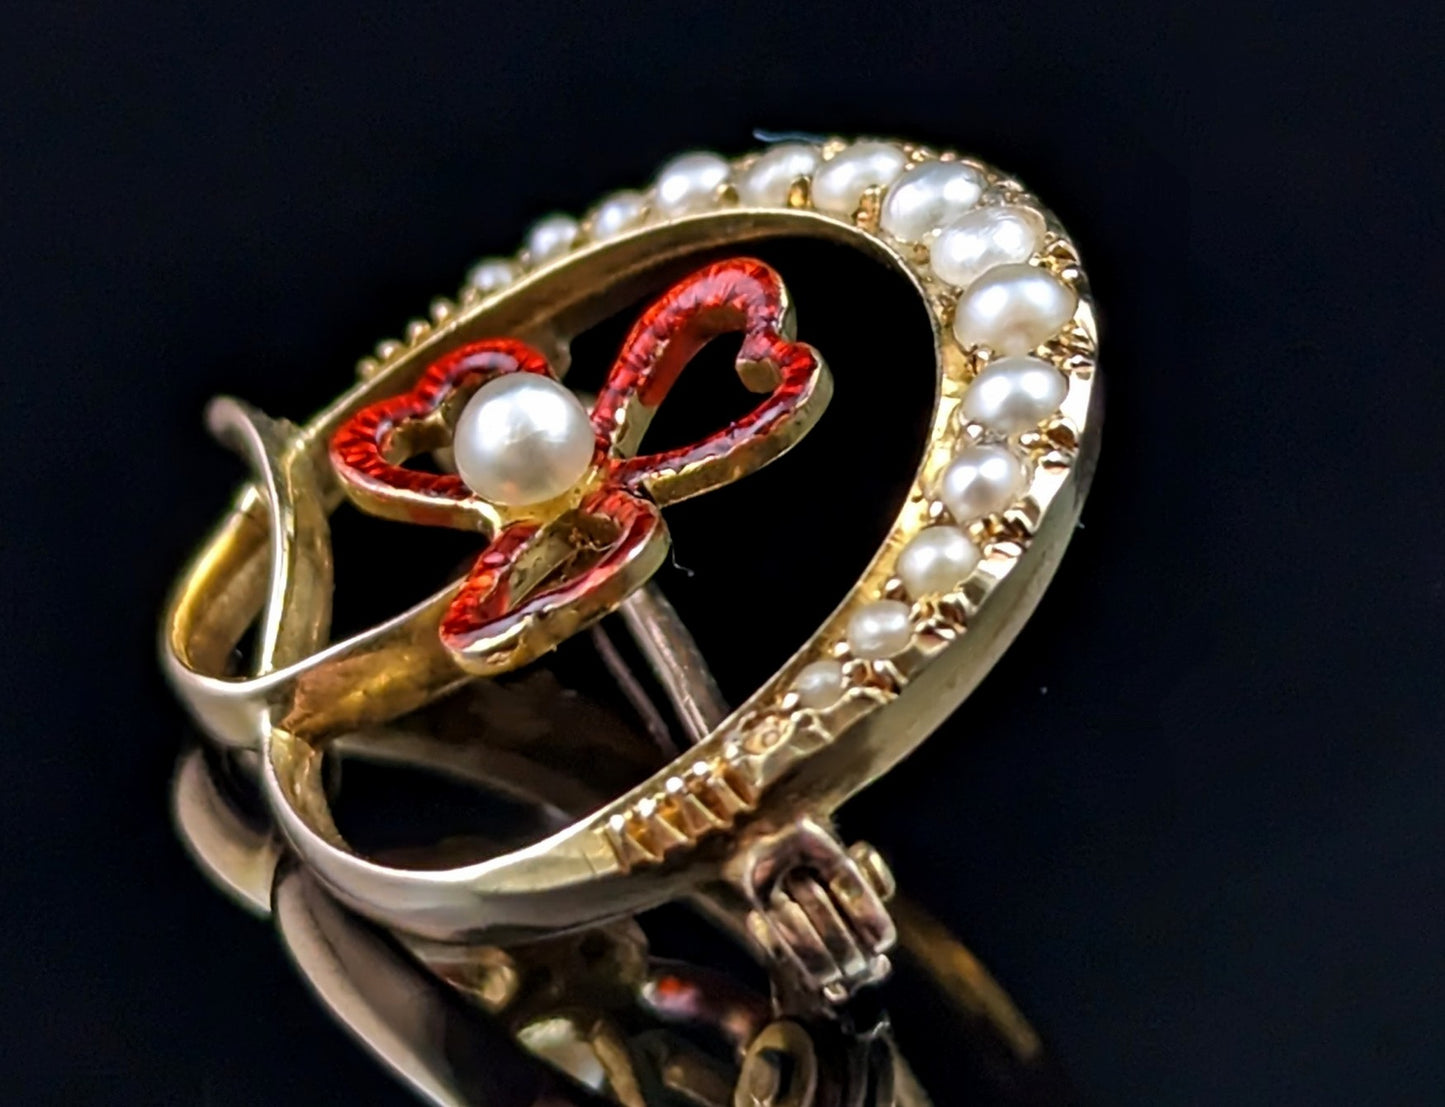 Antique Crescent and Shamrock brooch, Pearl and Red enamel, 15ct gold